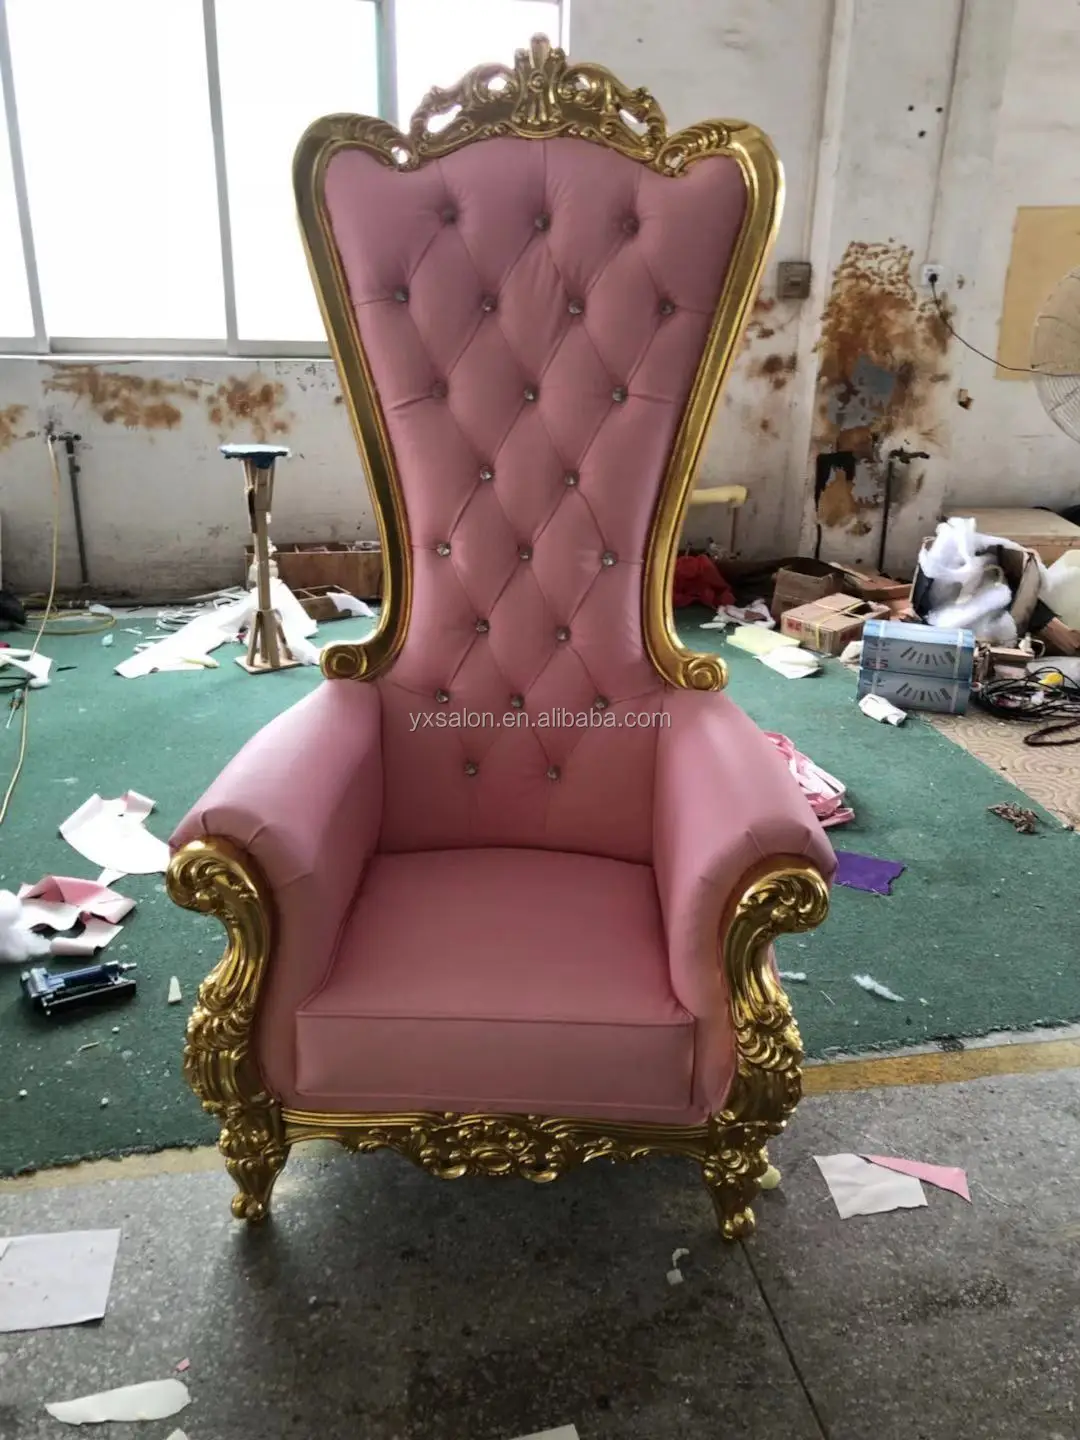 2019 Latest 5 Years Warranty Top Quality Luxuary European Style Pinkgold Solid Wood Throne Chair Pedicure Chair Princess Chair Buy Throne Chair